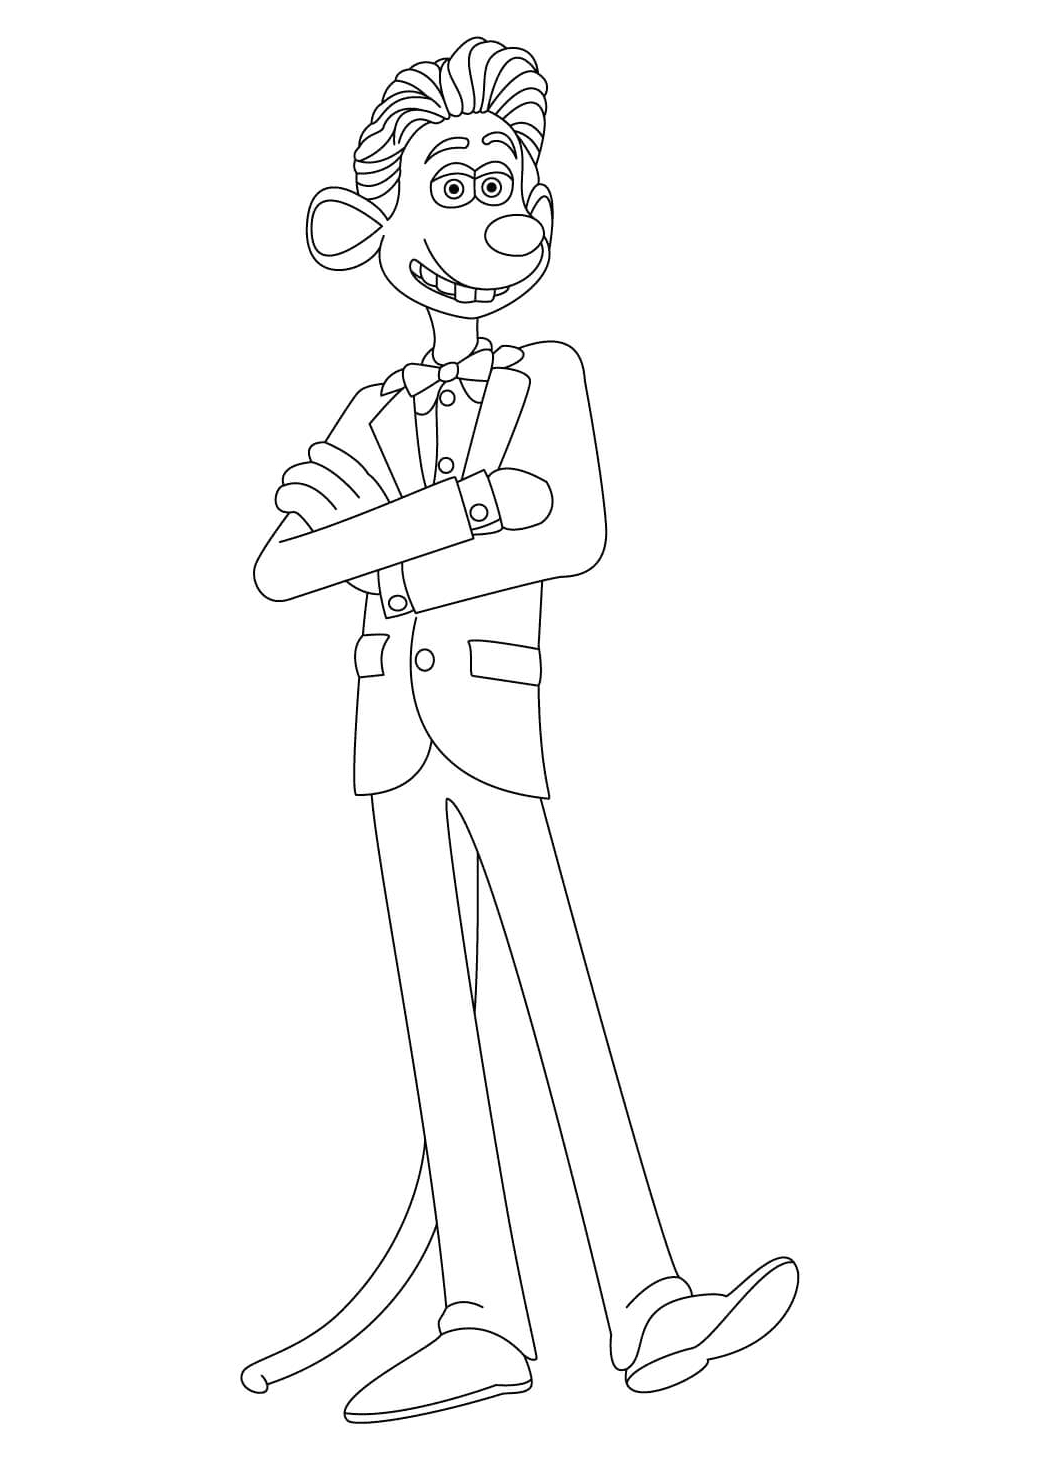 Roddy from Flushed Away Coloring Pages